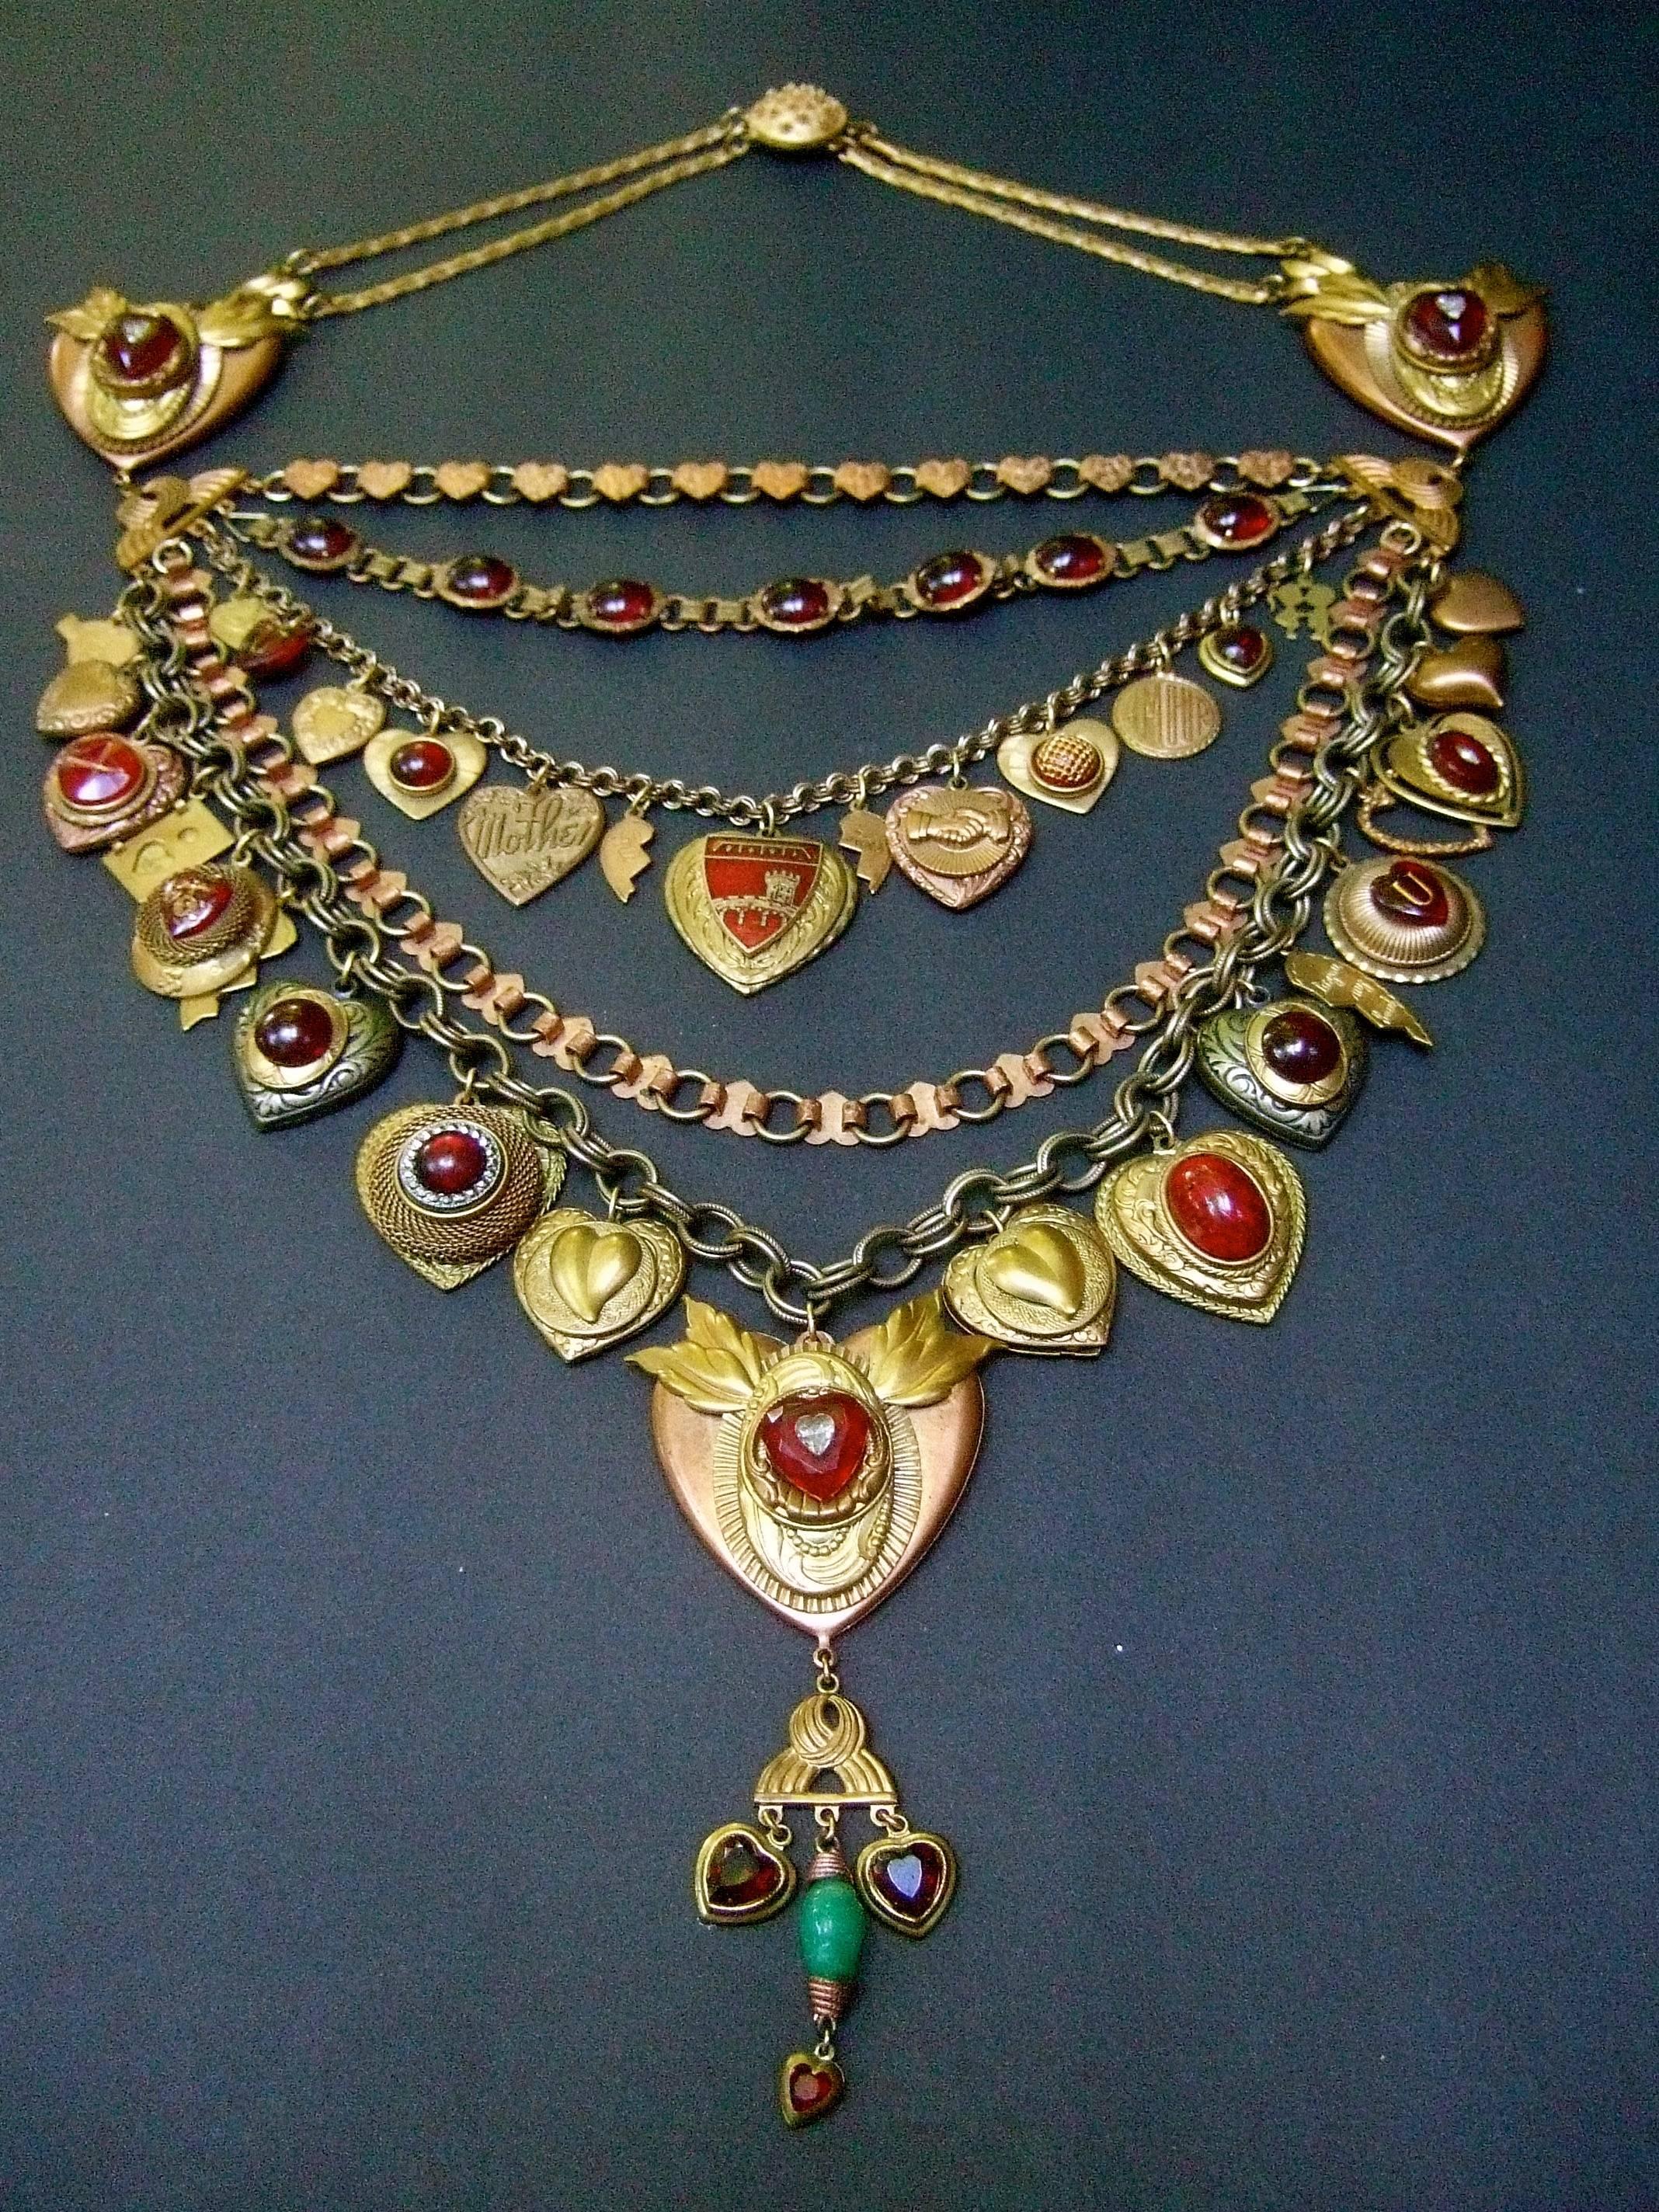 Massive artisan heart medallion charm necklace c 1980s
The handmade bib style necklace is embellished with a collection
of heart theme charms in various shapes, styles and metals   

The unique artisan necklace is designed with copper
tone and brass